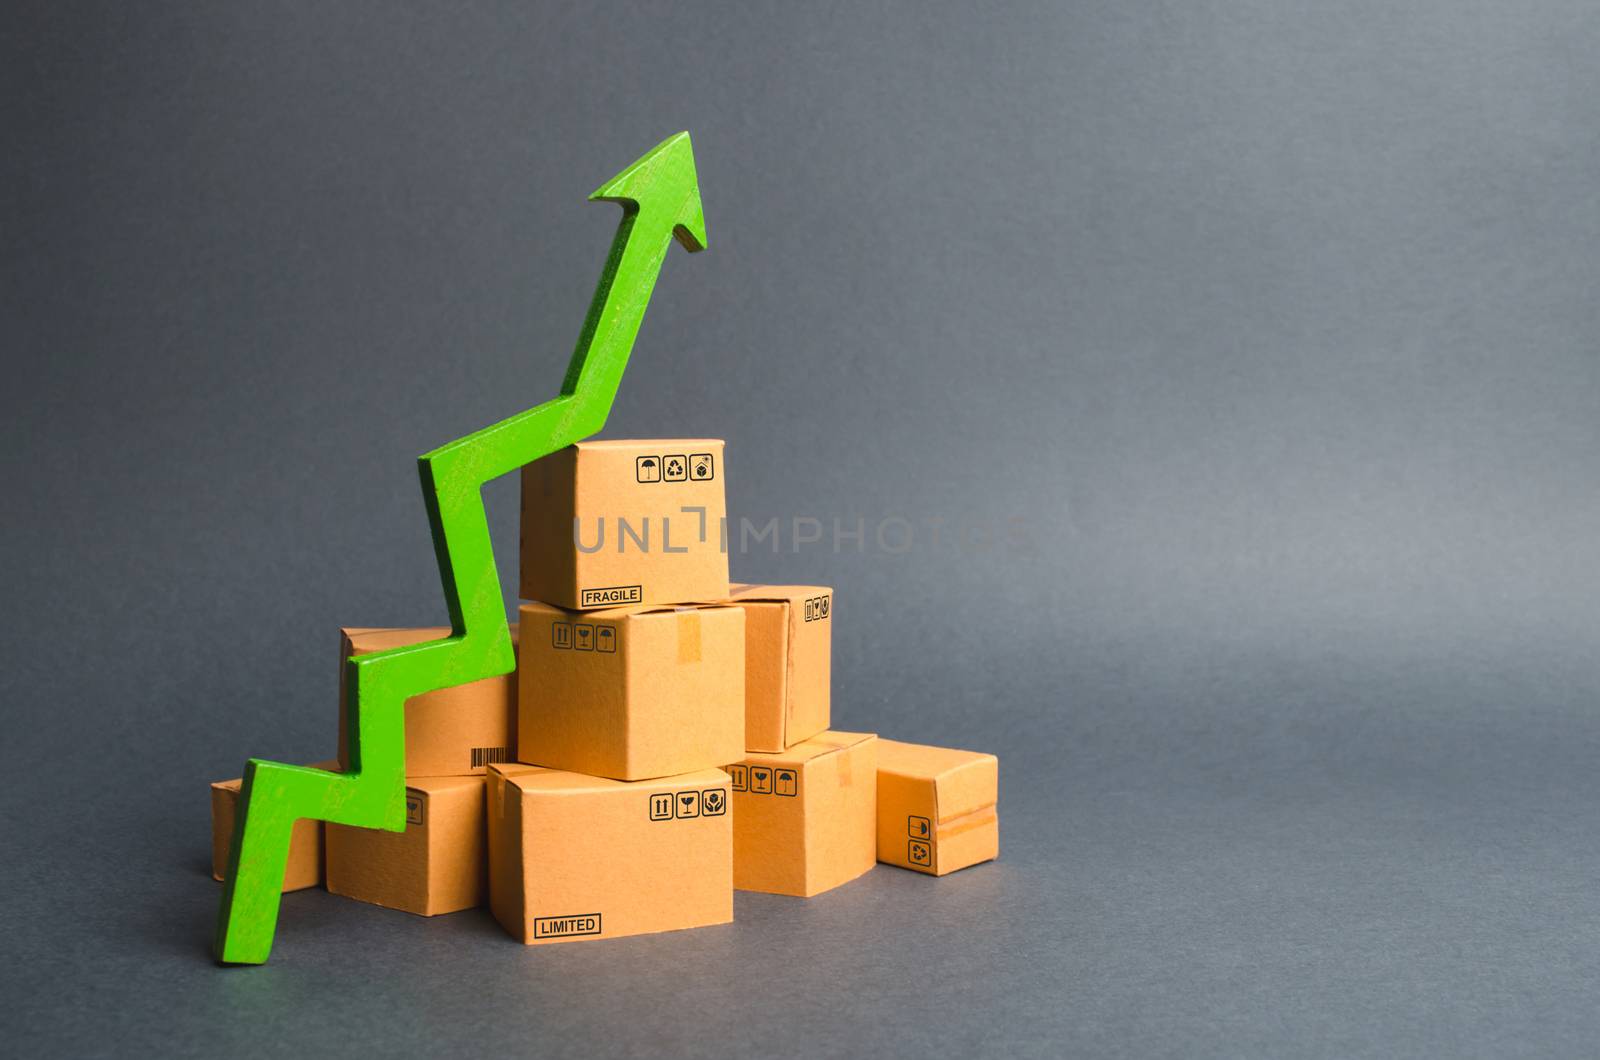 A pile of cardboard boxes and a green up arrow. The growth rate of production of goods and products, increasing economic indicators. Increasing consumer demand, increasing exports or imports.